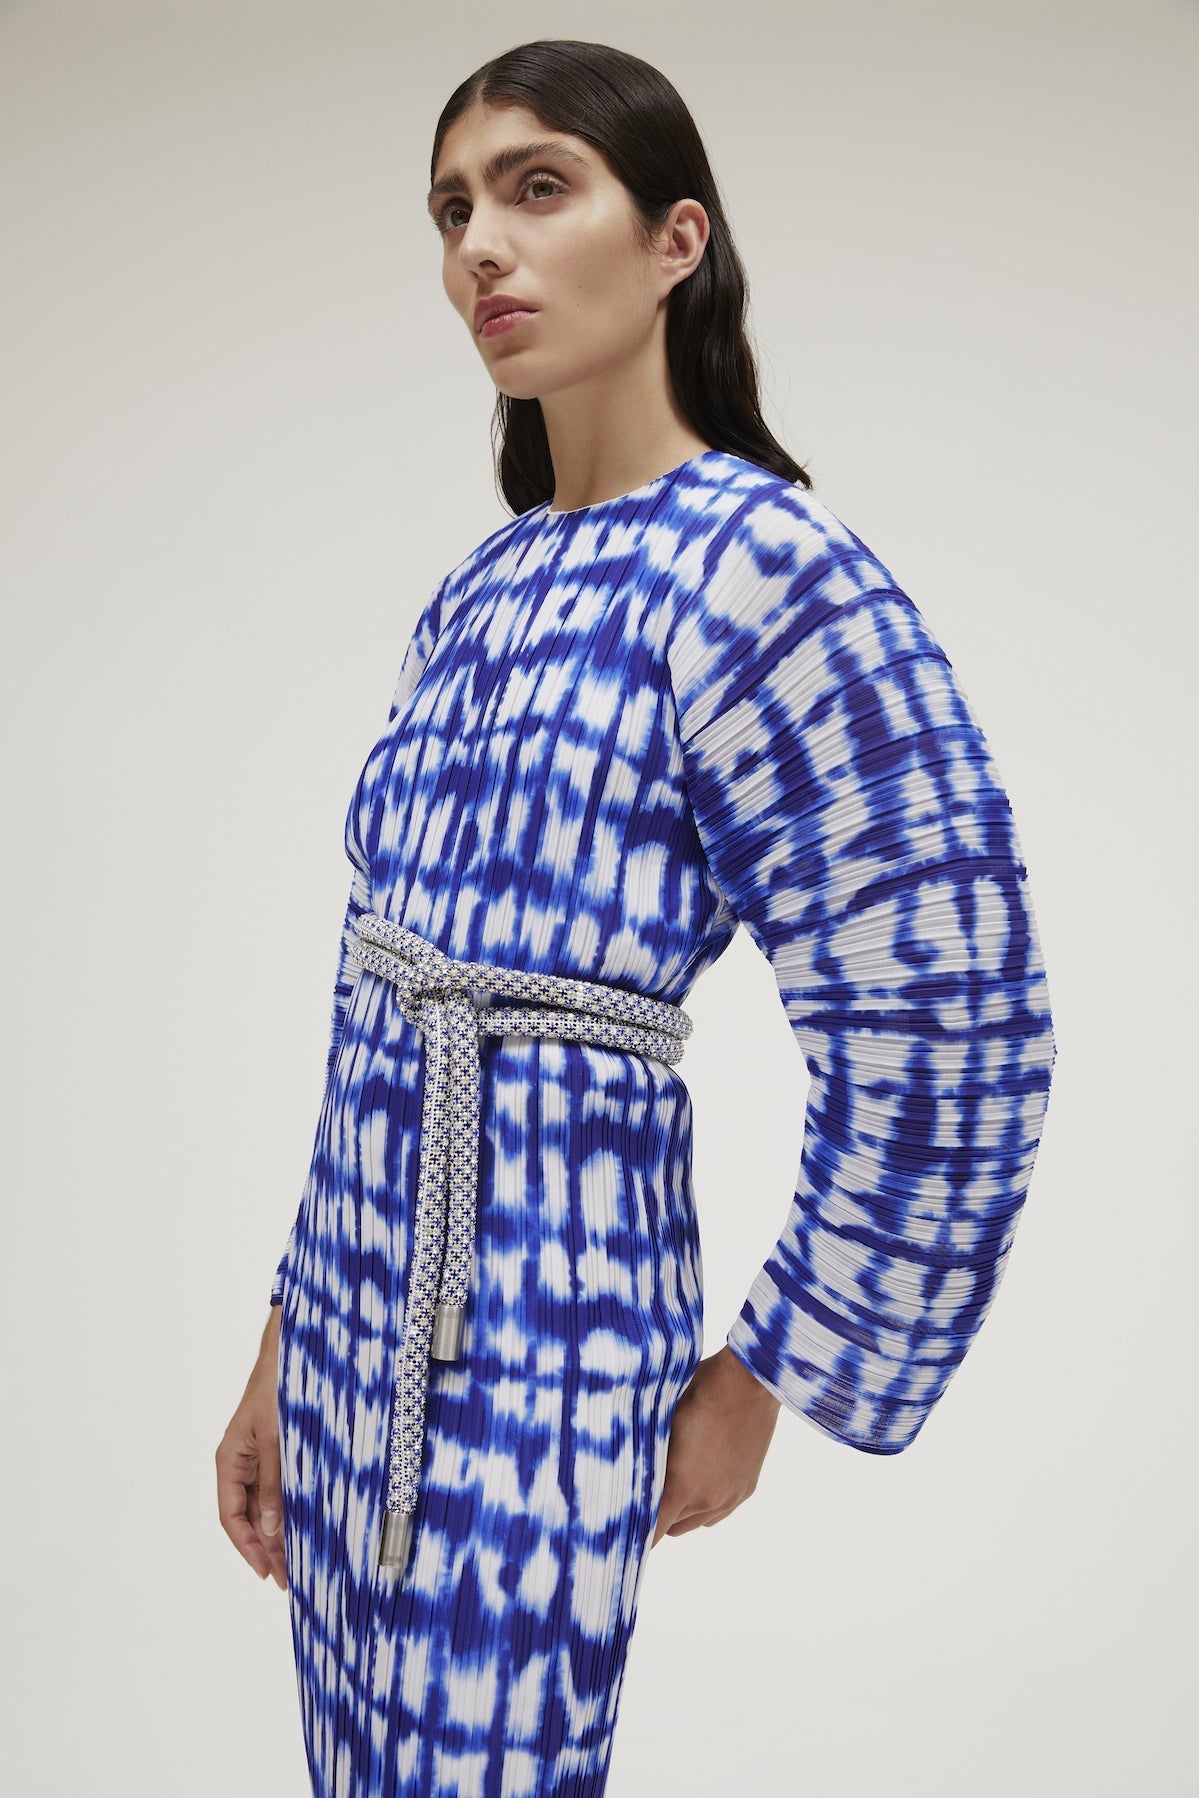 The Mirabelle Dress in Cobalt Blue Painted Check